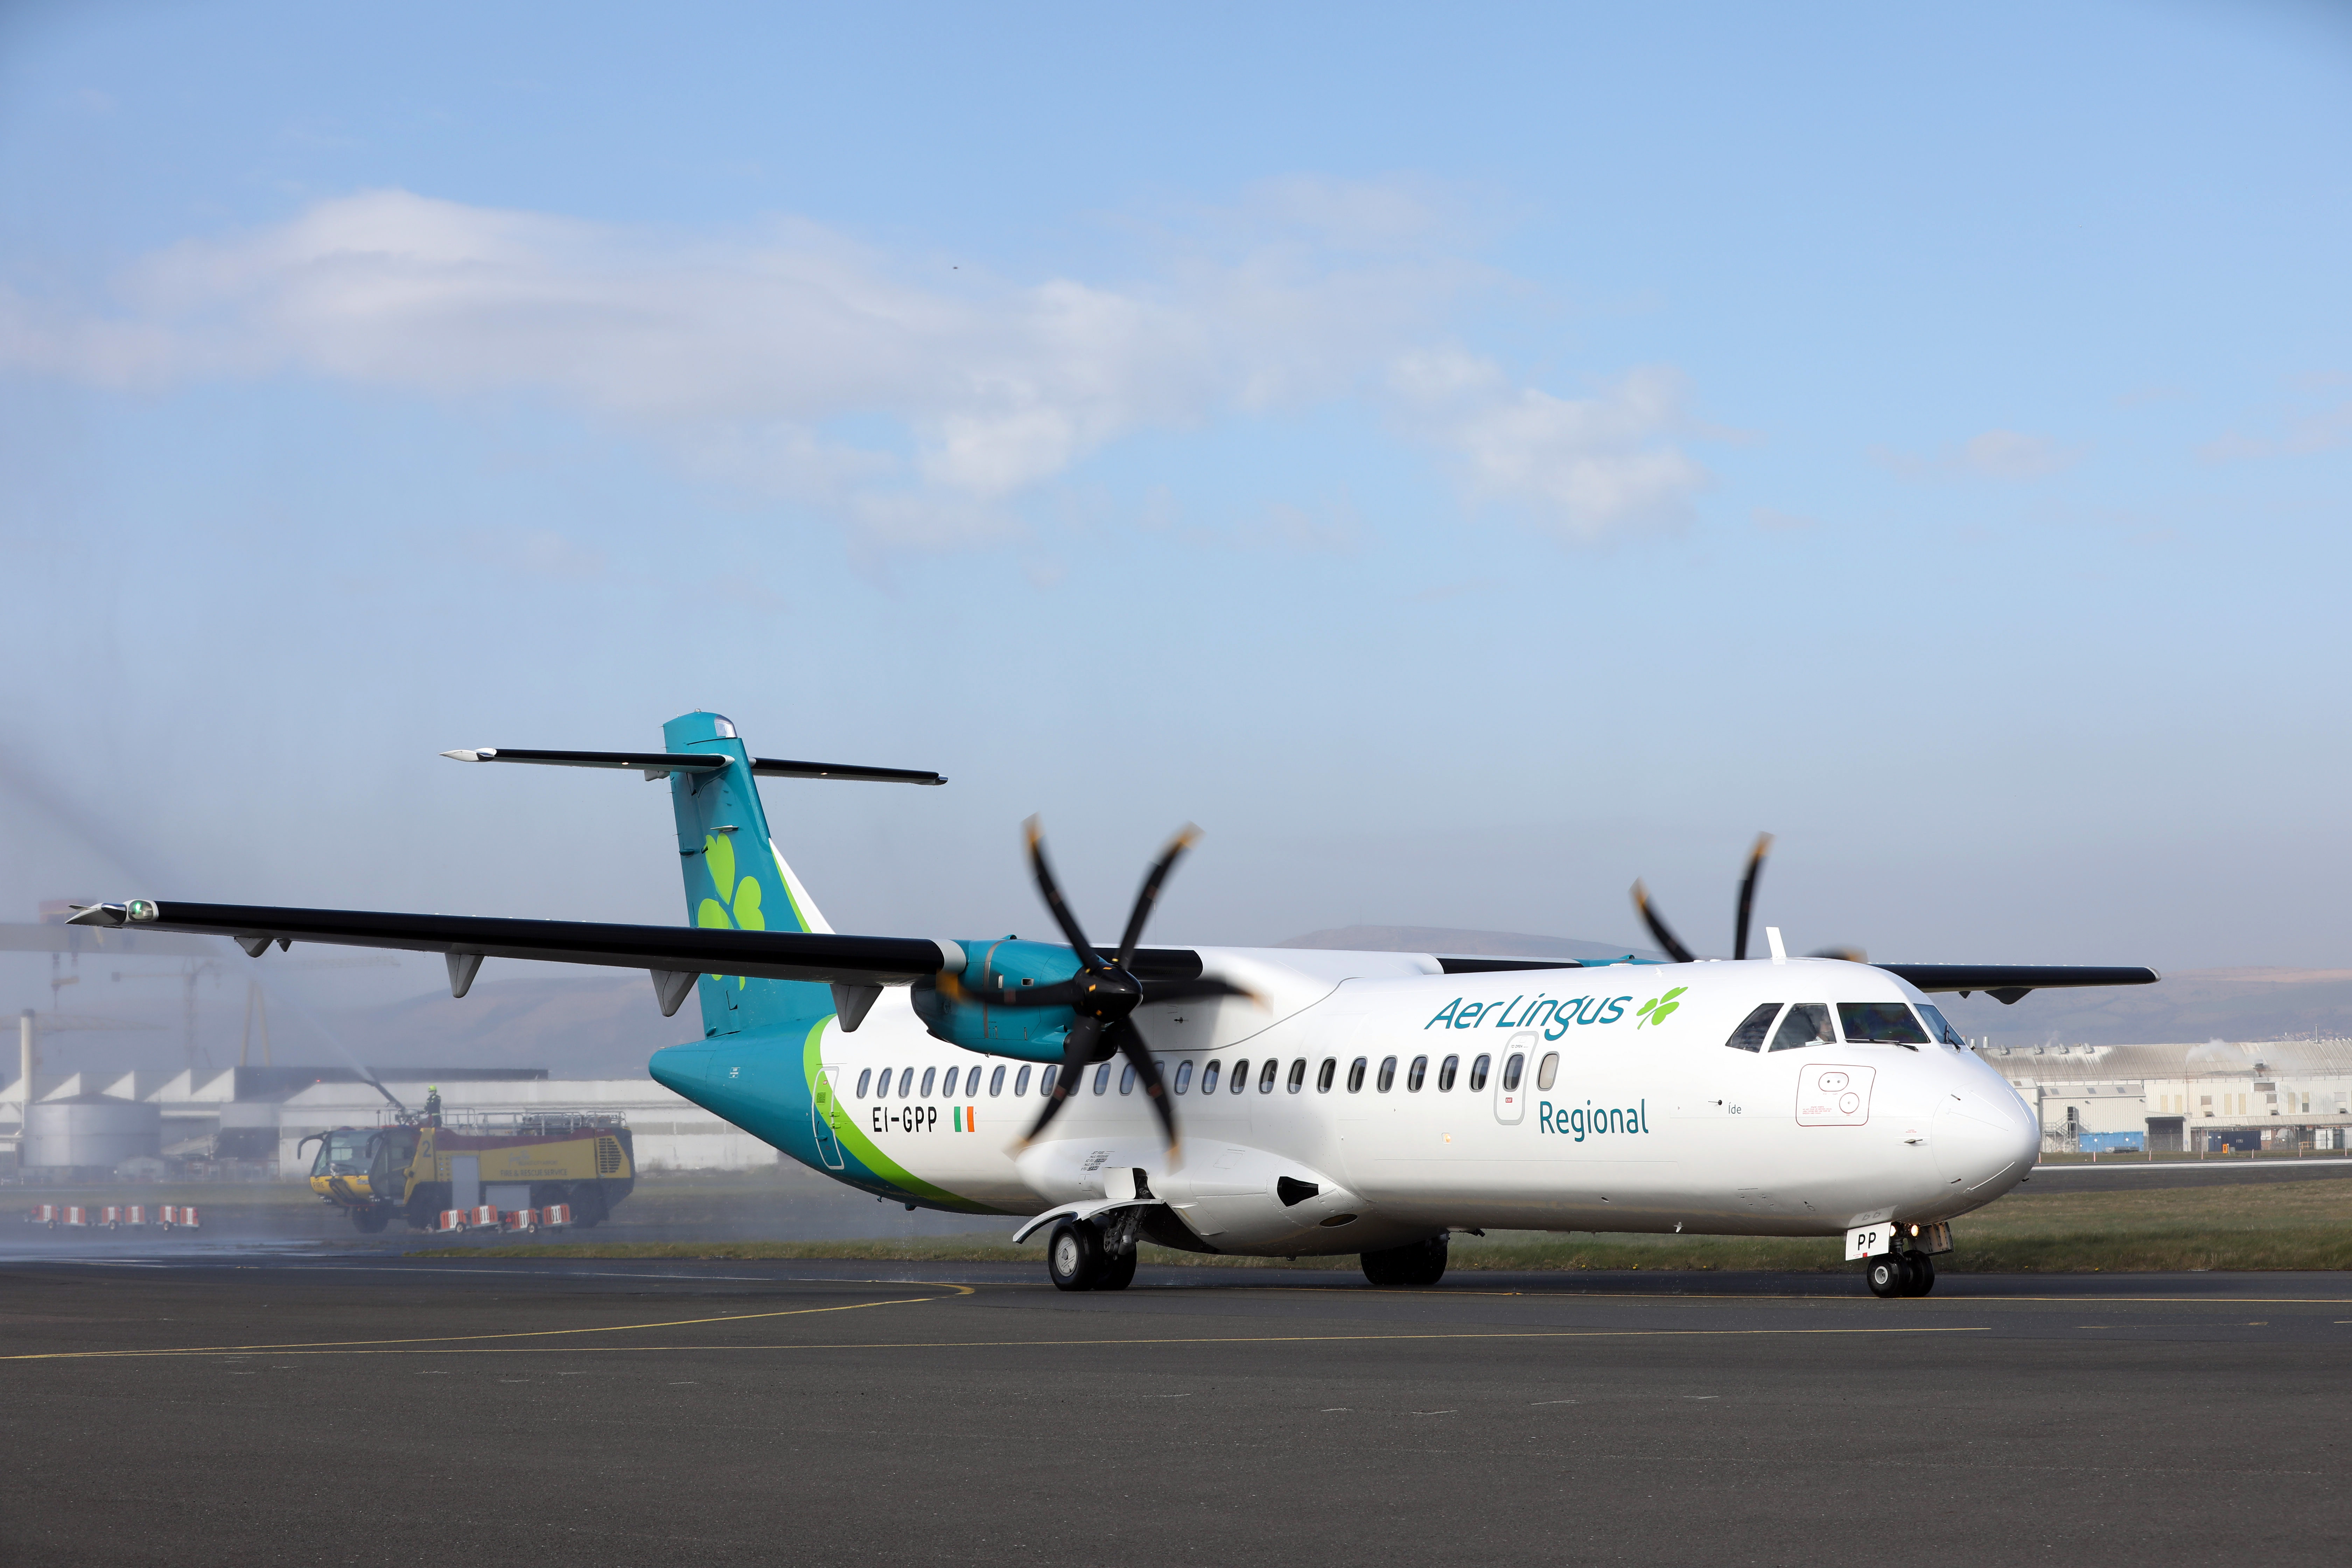 Aer Lingus Regional Further Strengthens its Belfast Schedule with New Service to the Isle of Man